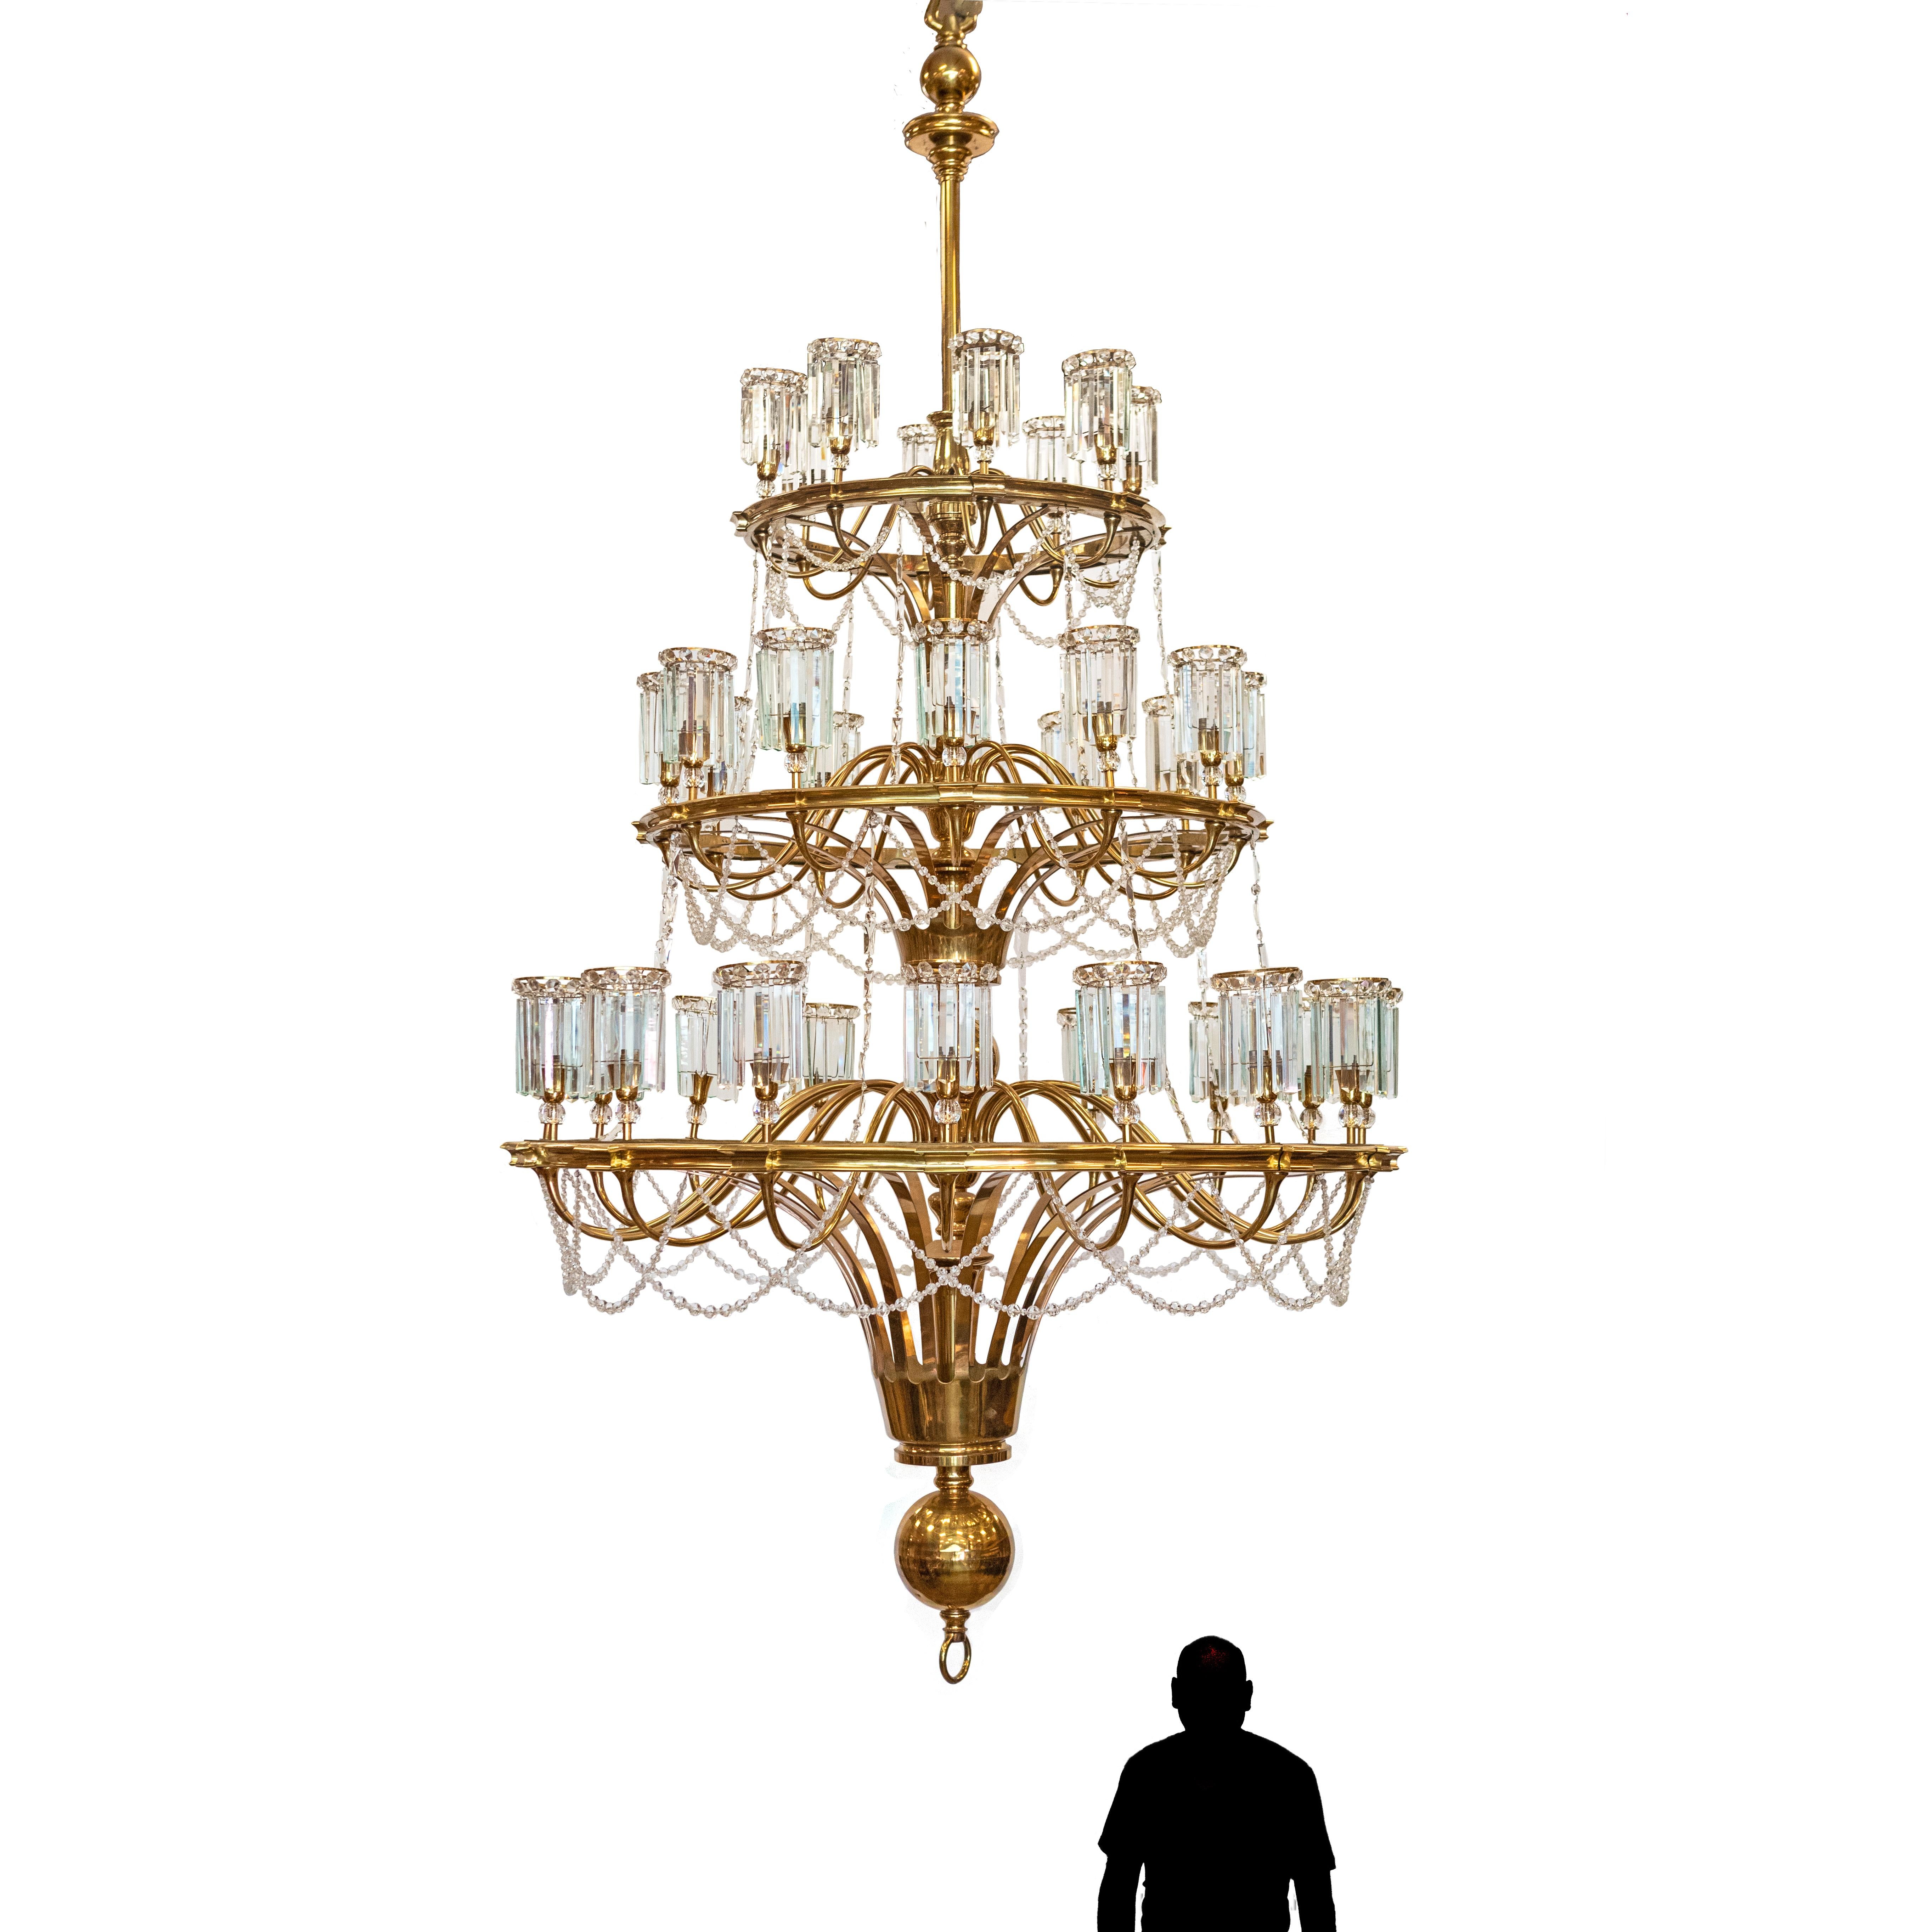 The sheer size and scale of this chandelier are spectacular.

Once belonging to the Leathersellers, London, a Livery board and charitable foundation with a first Royal Charter in 1444 - The crystal and brass chandelier took prime position on the